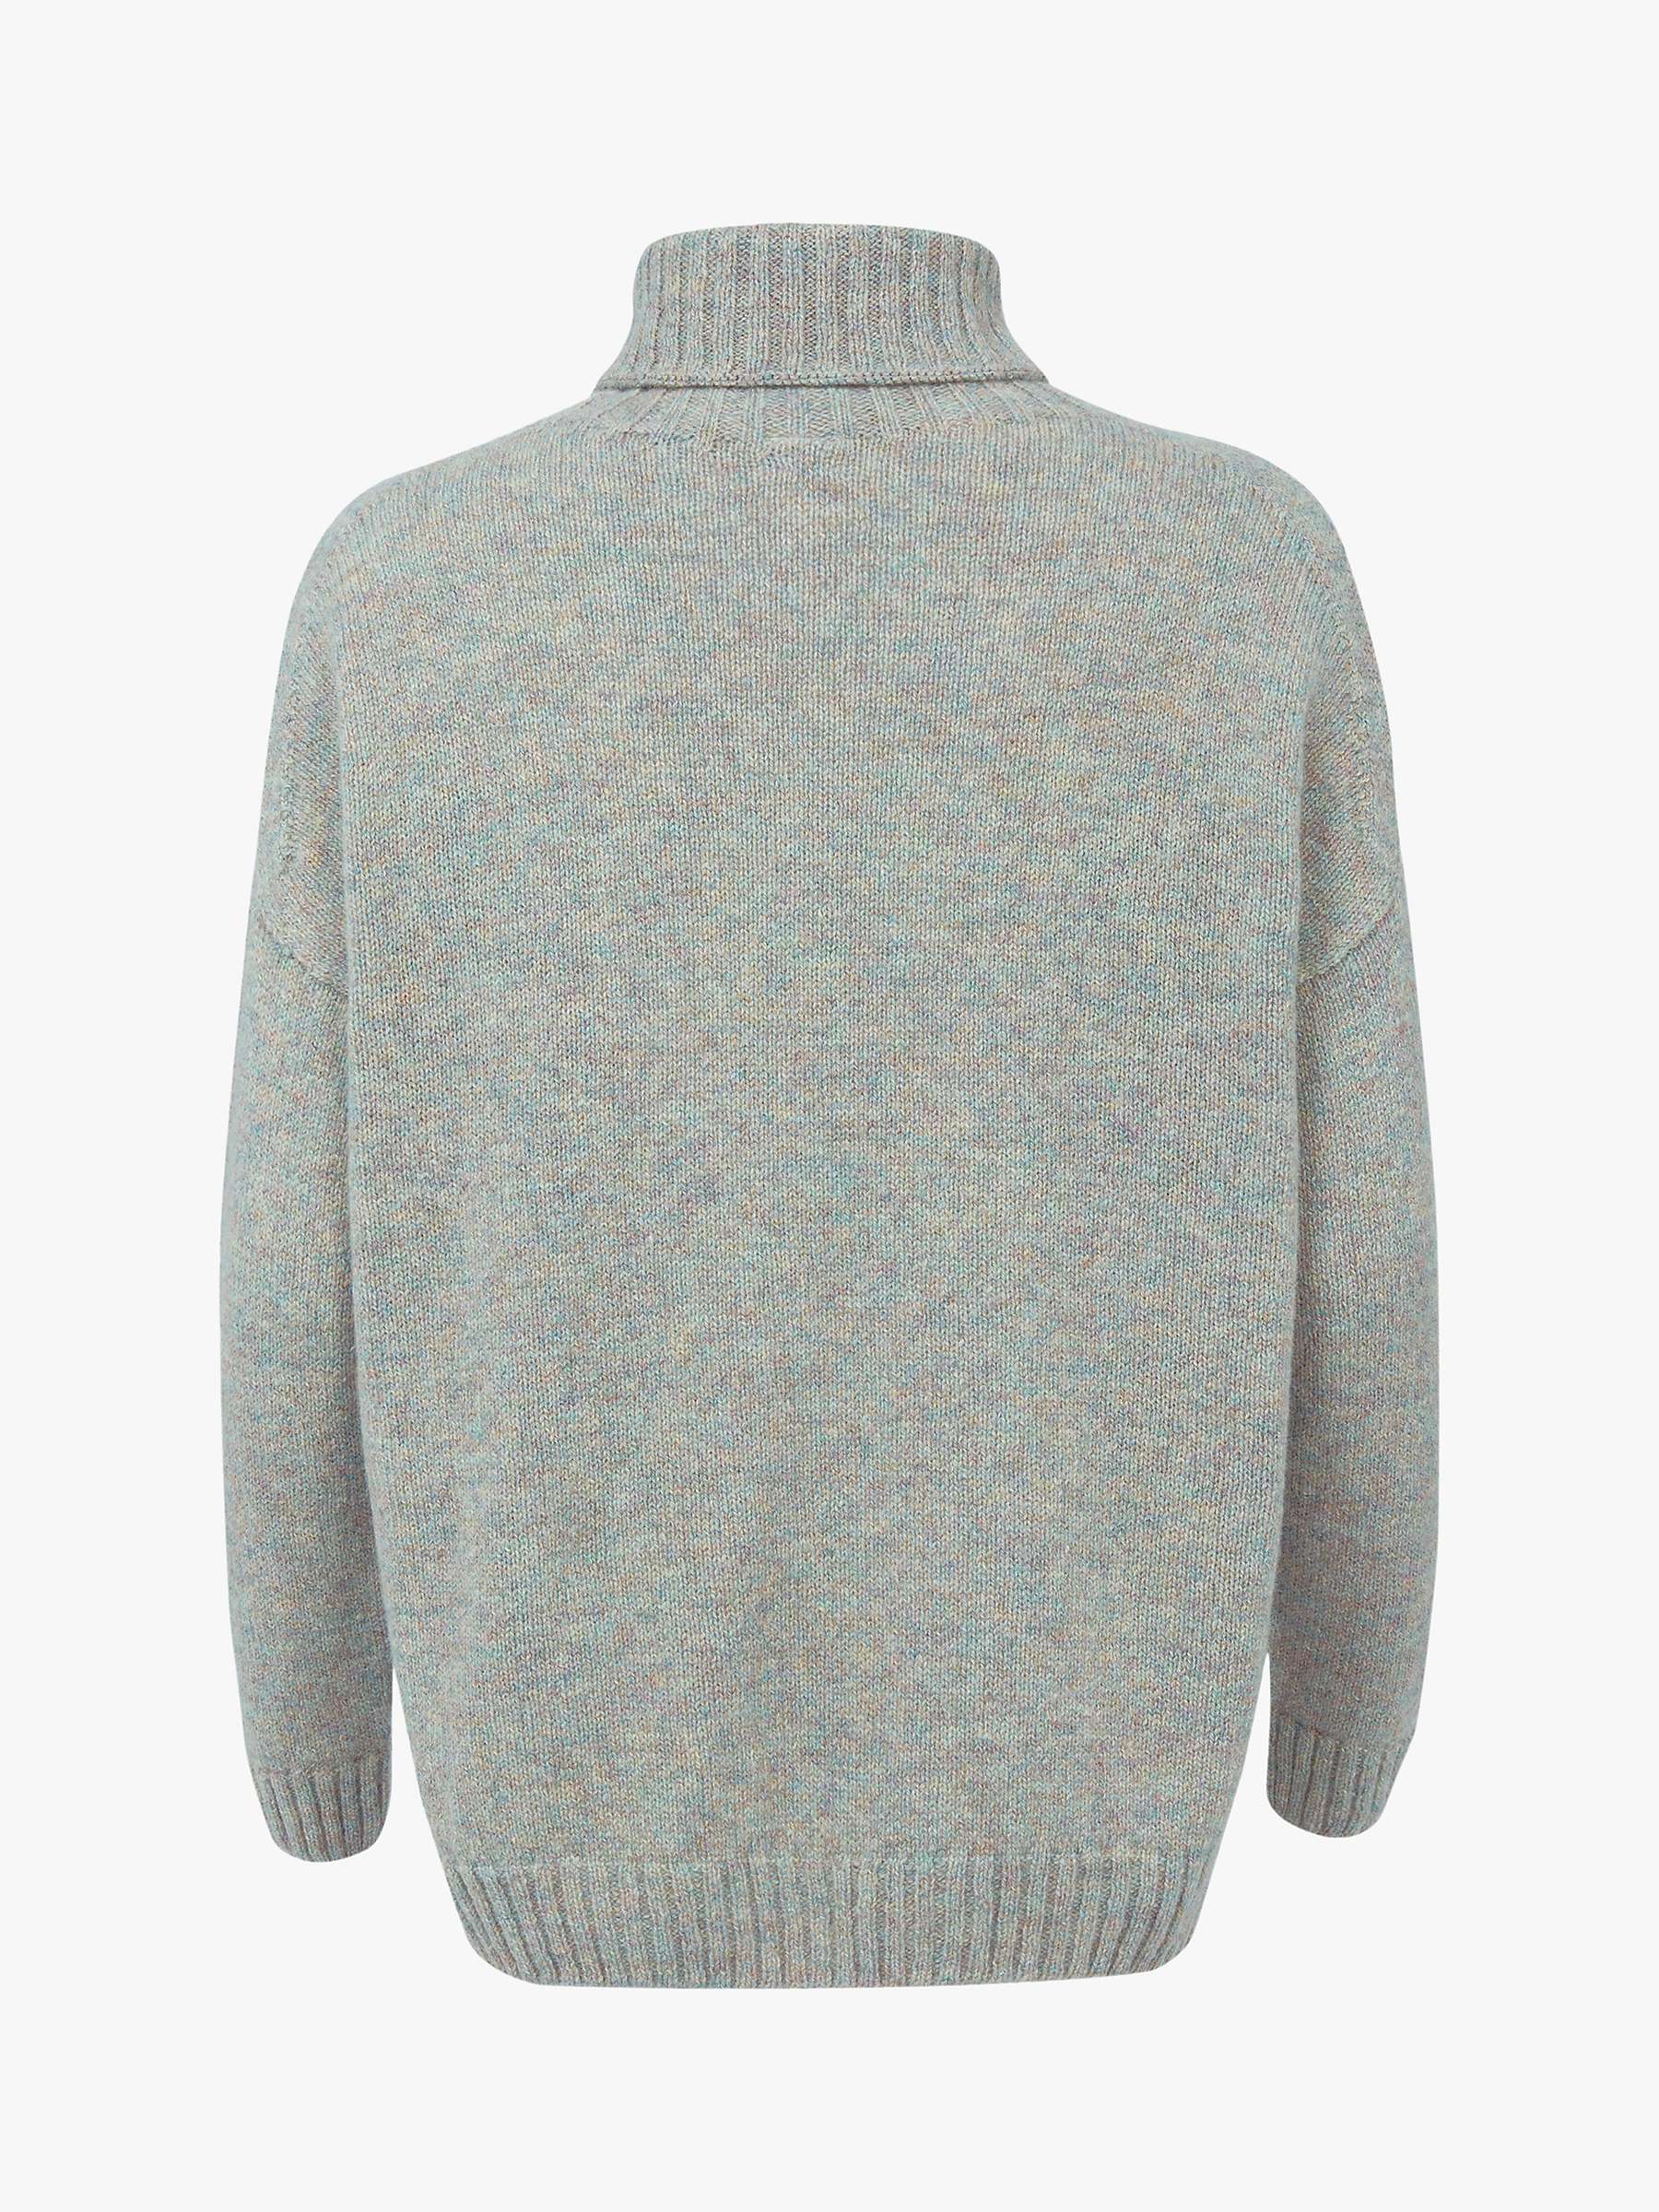 Celtic & Co. Slouch Roll Neck Wool Jumper, Opal at John Lewis & Partners